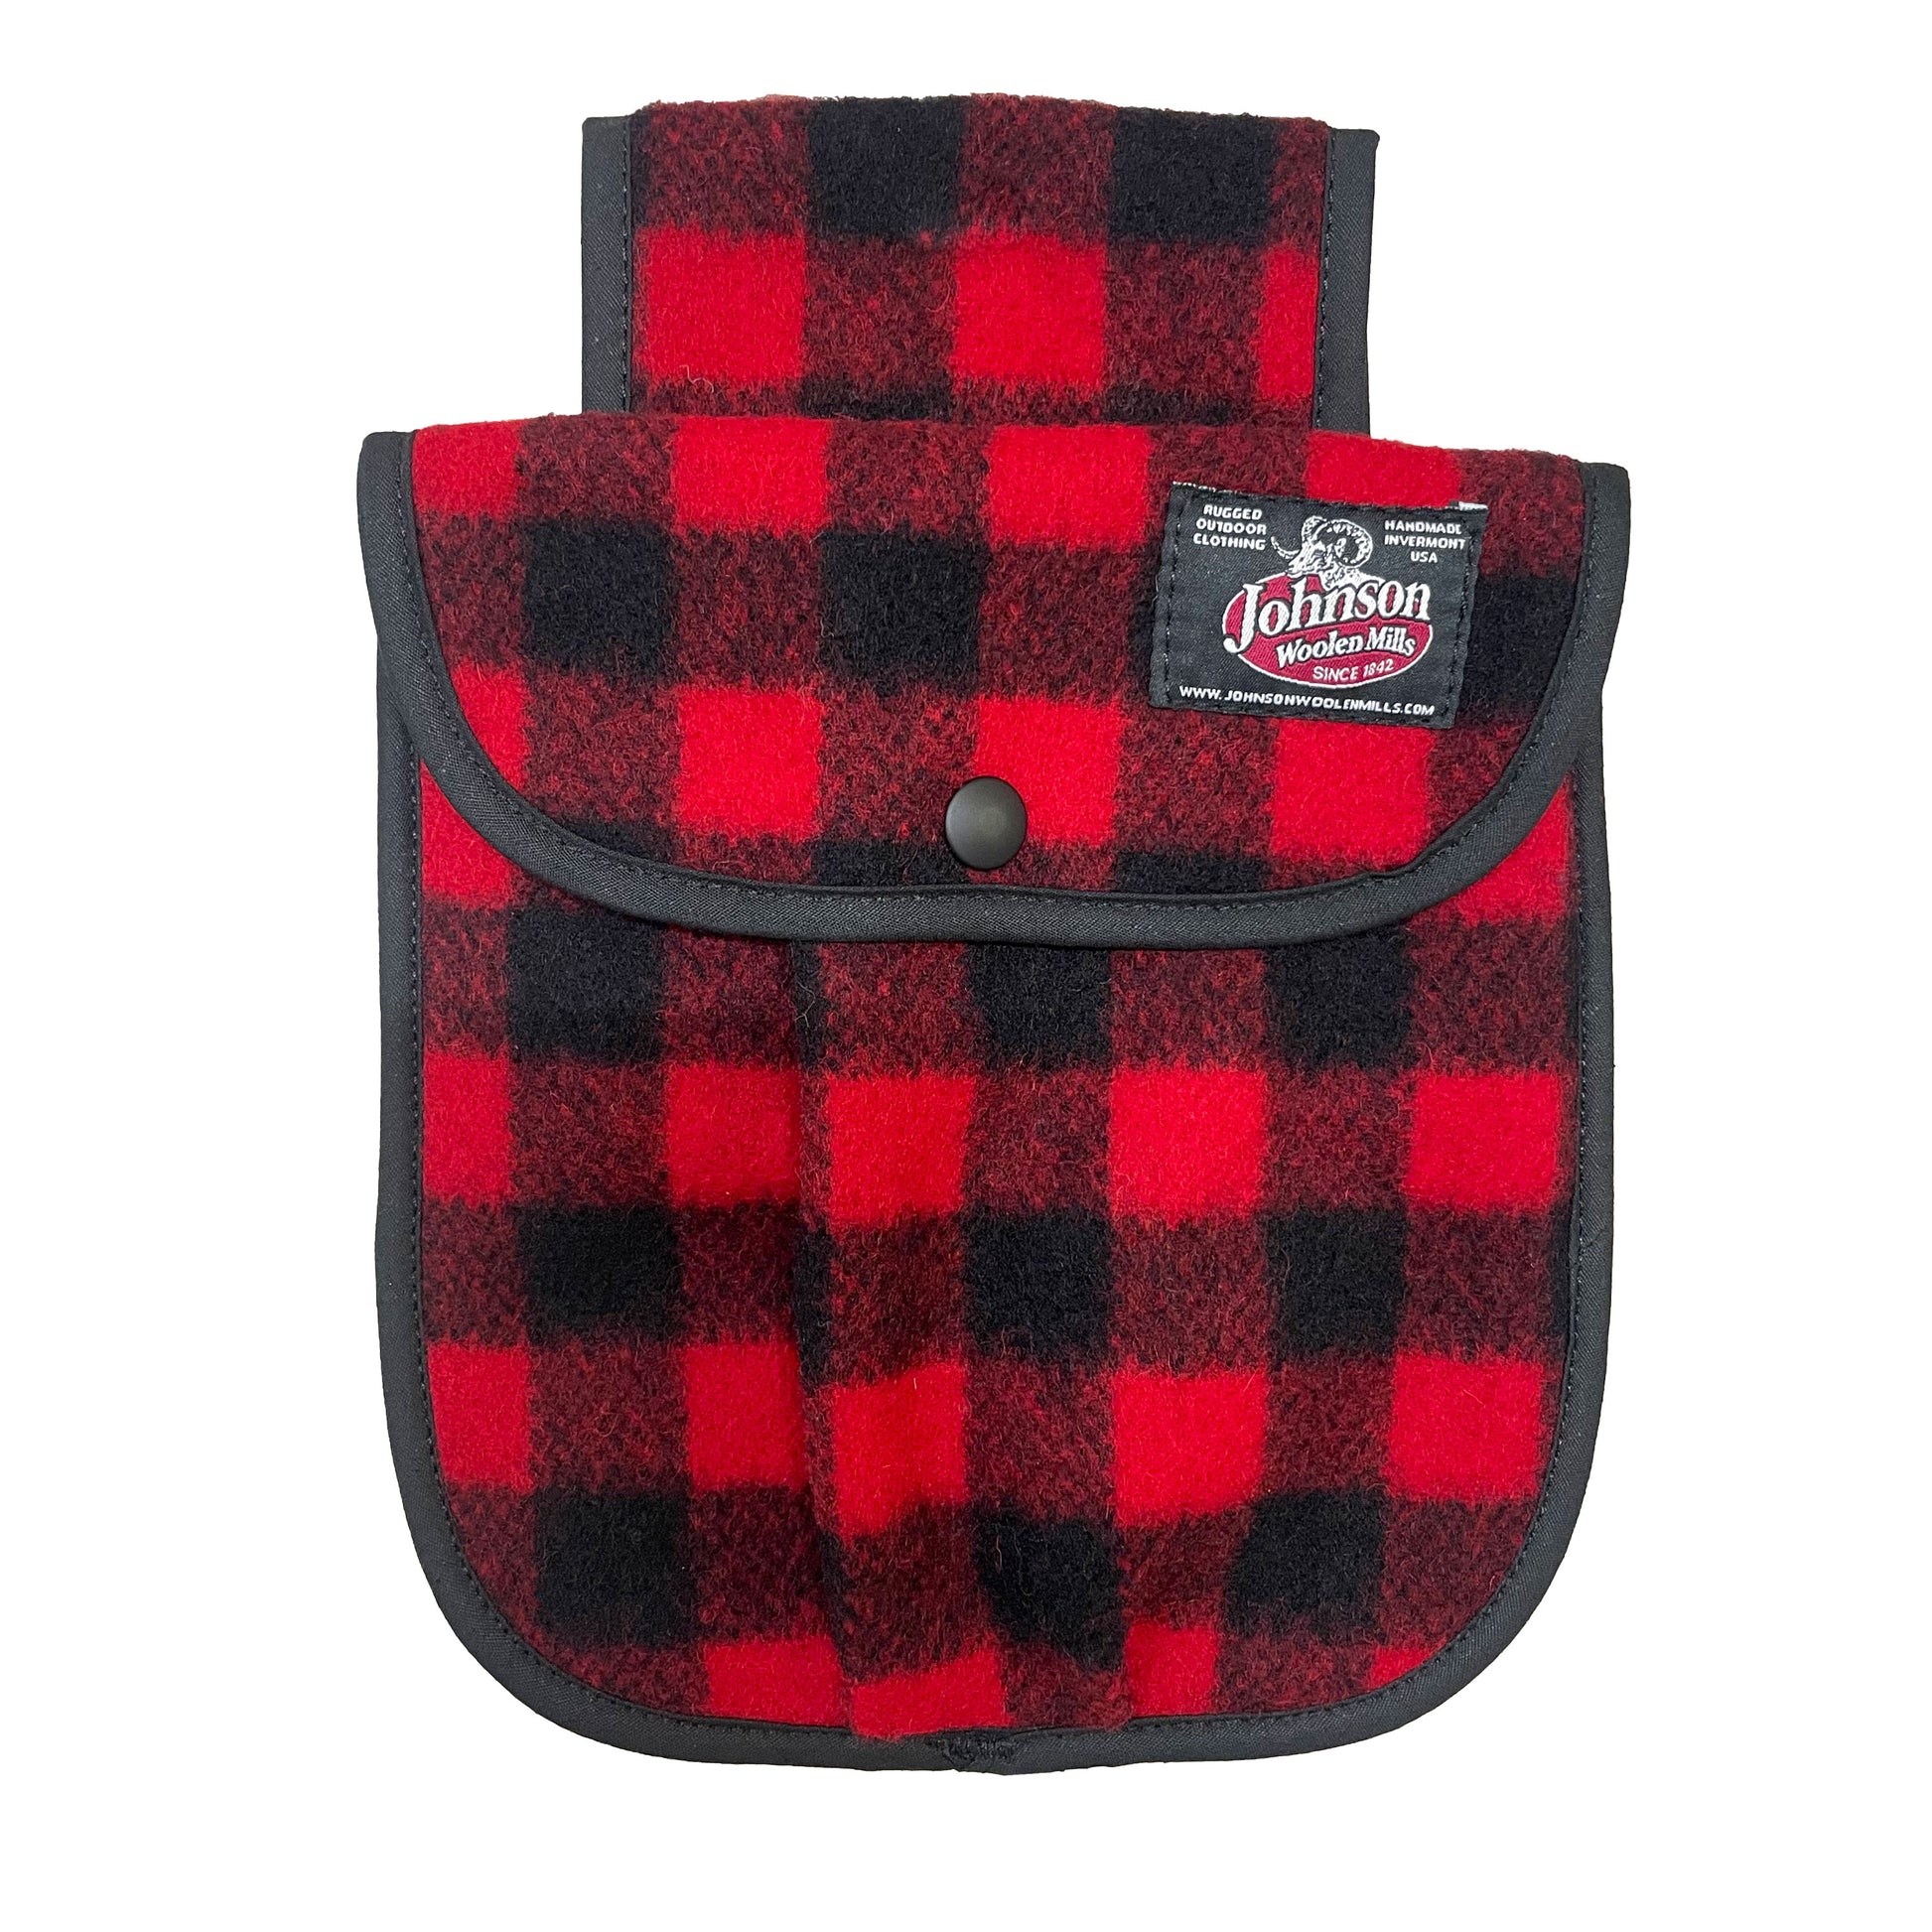 Wool red and black buffalo check black powder hunting pouch